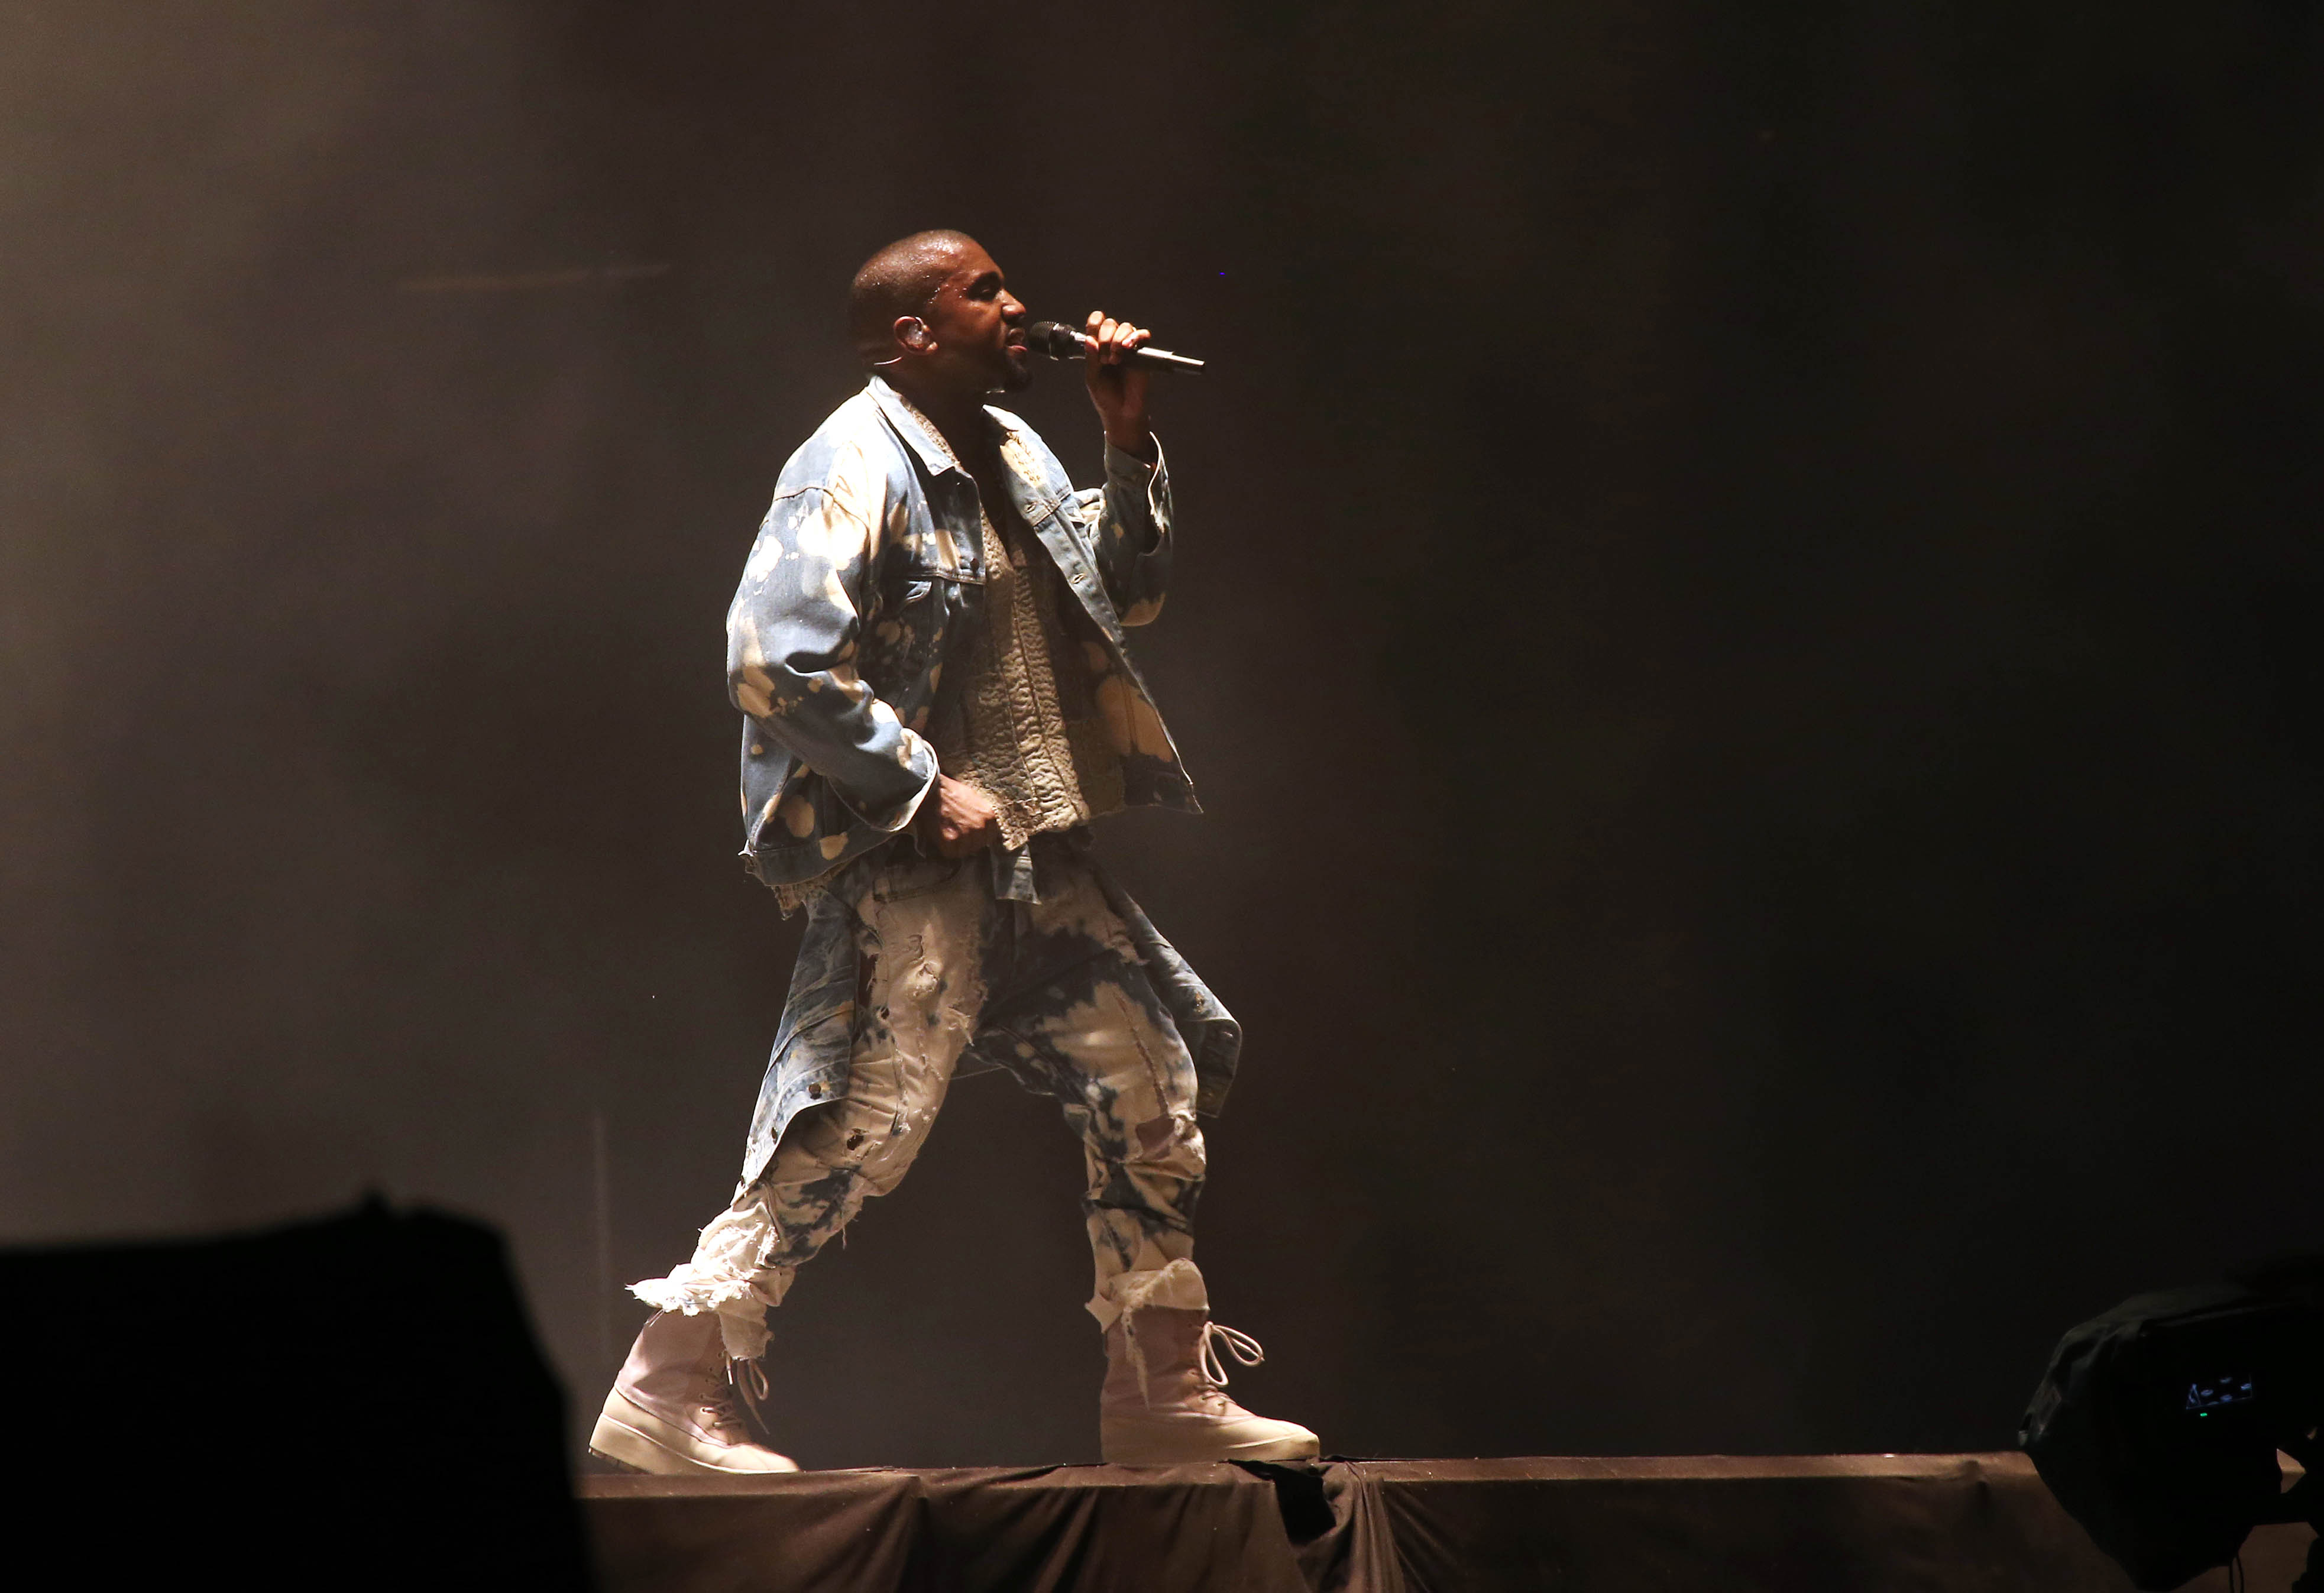 Kanye West performs during the 2015 Glastonbury music festival. (Joel Ryan—Invision/AP)